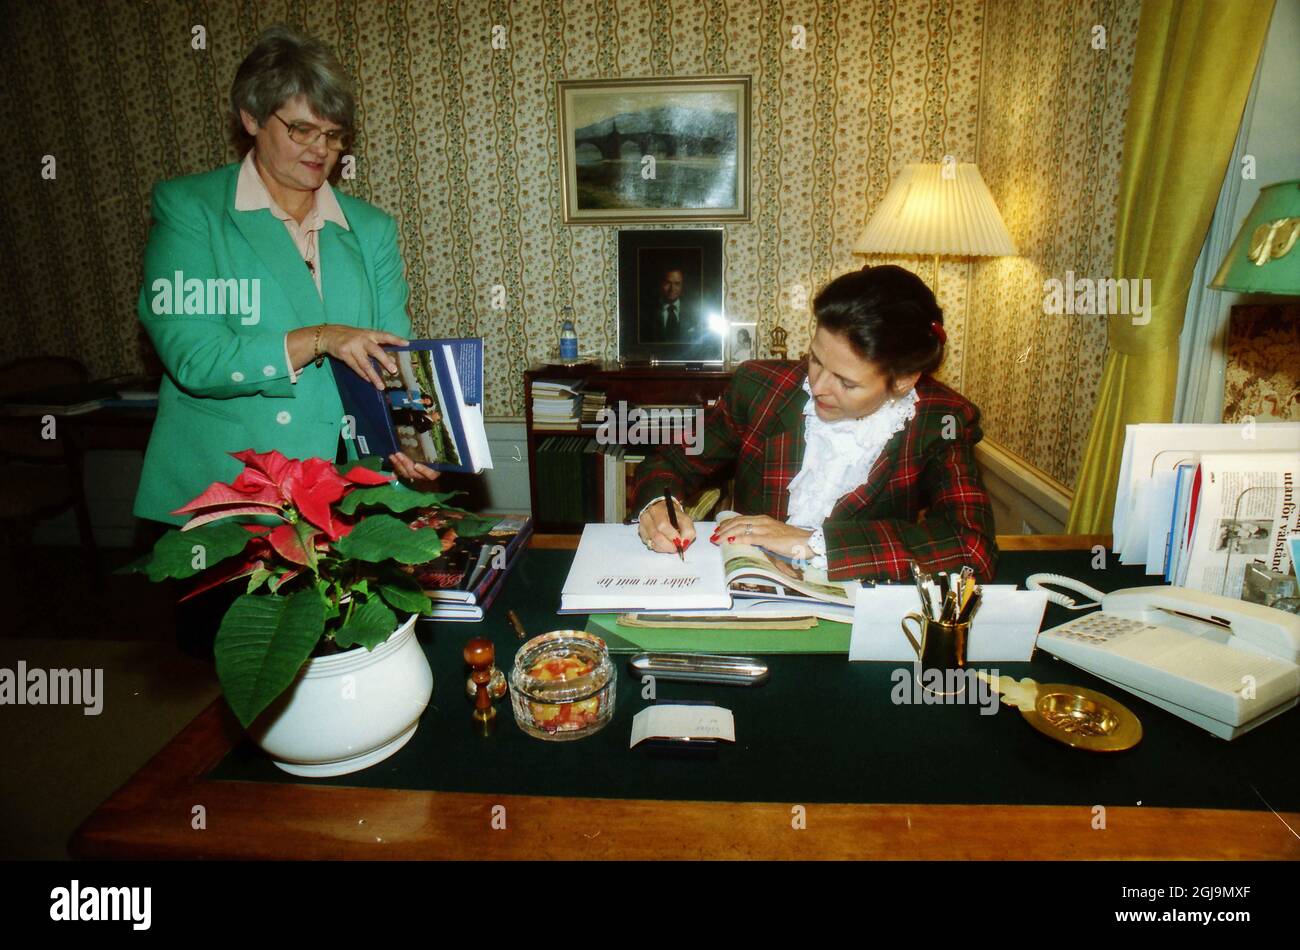 STOCKHOLM 1993-12 * For Your Files* Queen Silvia of Sweden is seen in her study at the Royal Palace in Stockholm, Sweden, December, 1993. The Queen is seen signing her book before her 50th birthday. Foto Leif Blom / TT-Bild code 50080  Stock Photo